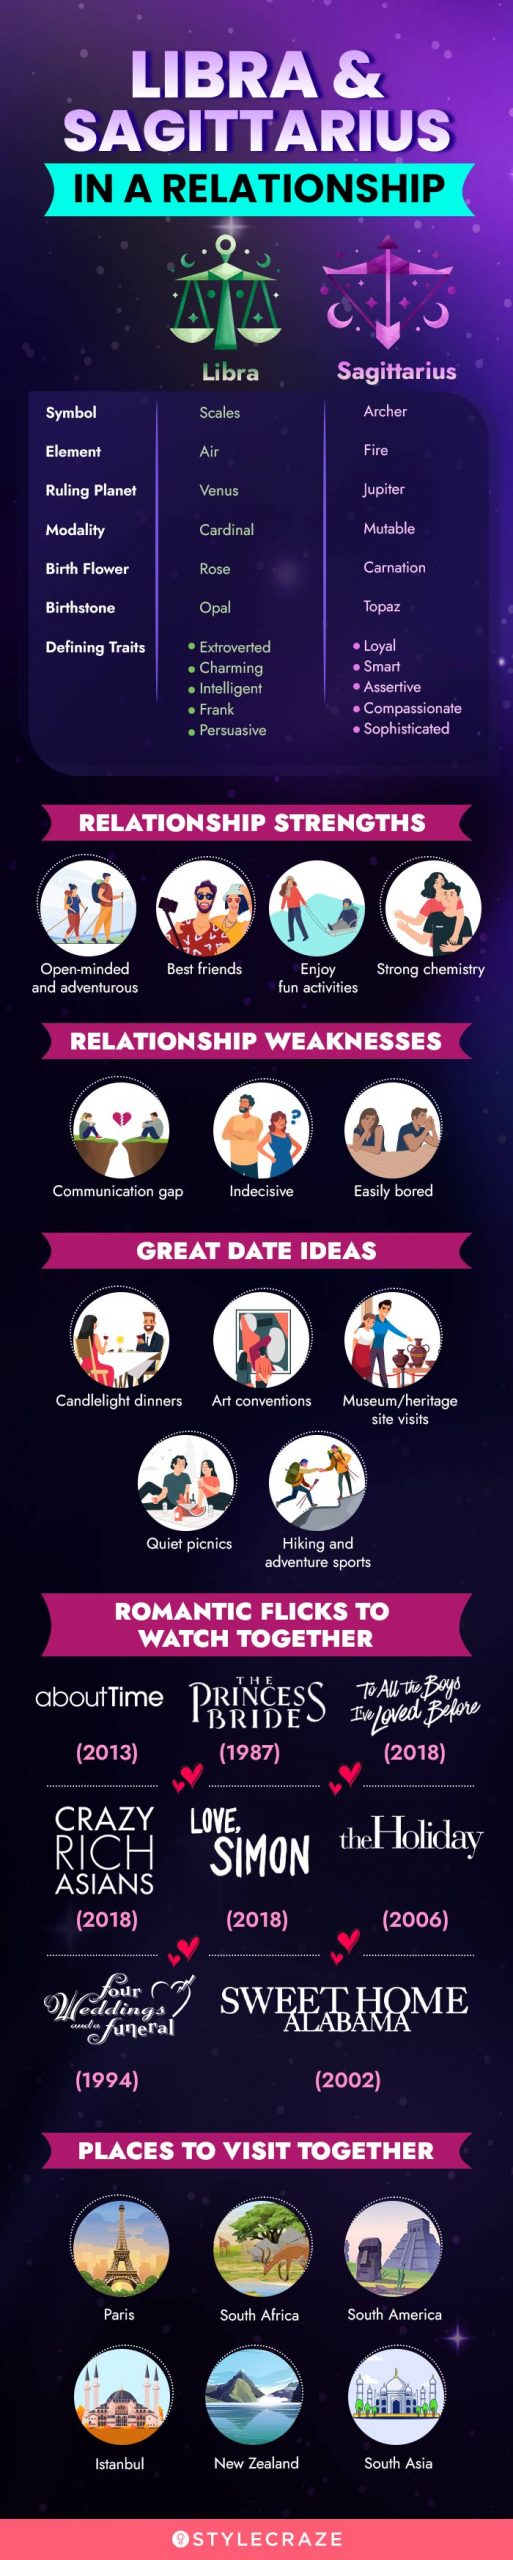 libra and sagittarius in a relationship [infographic]